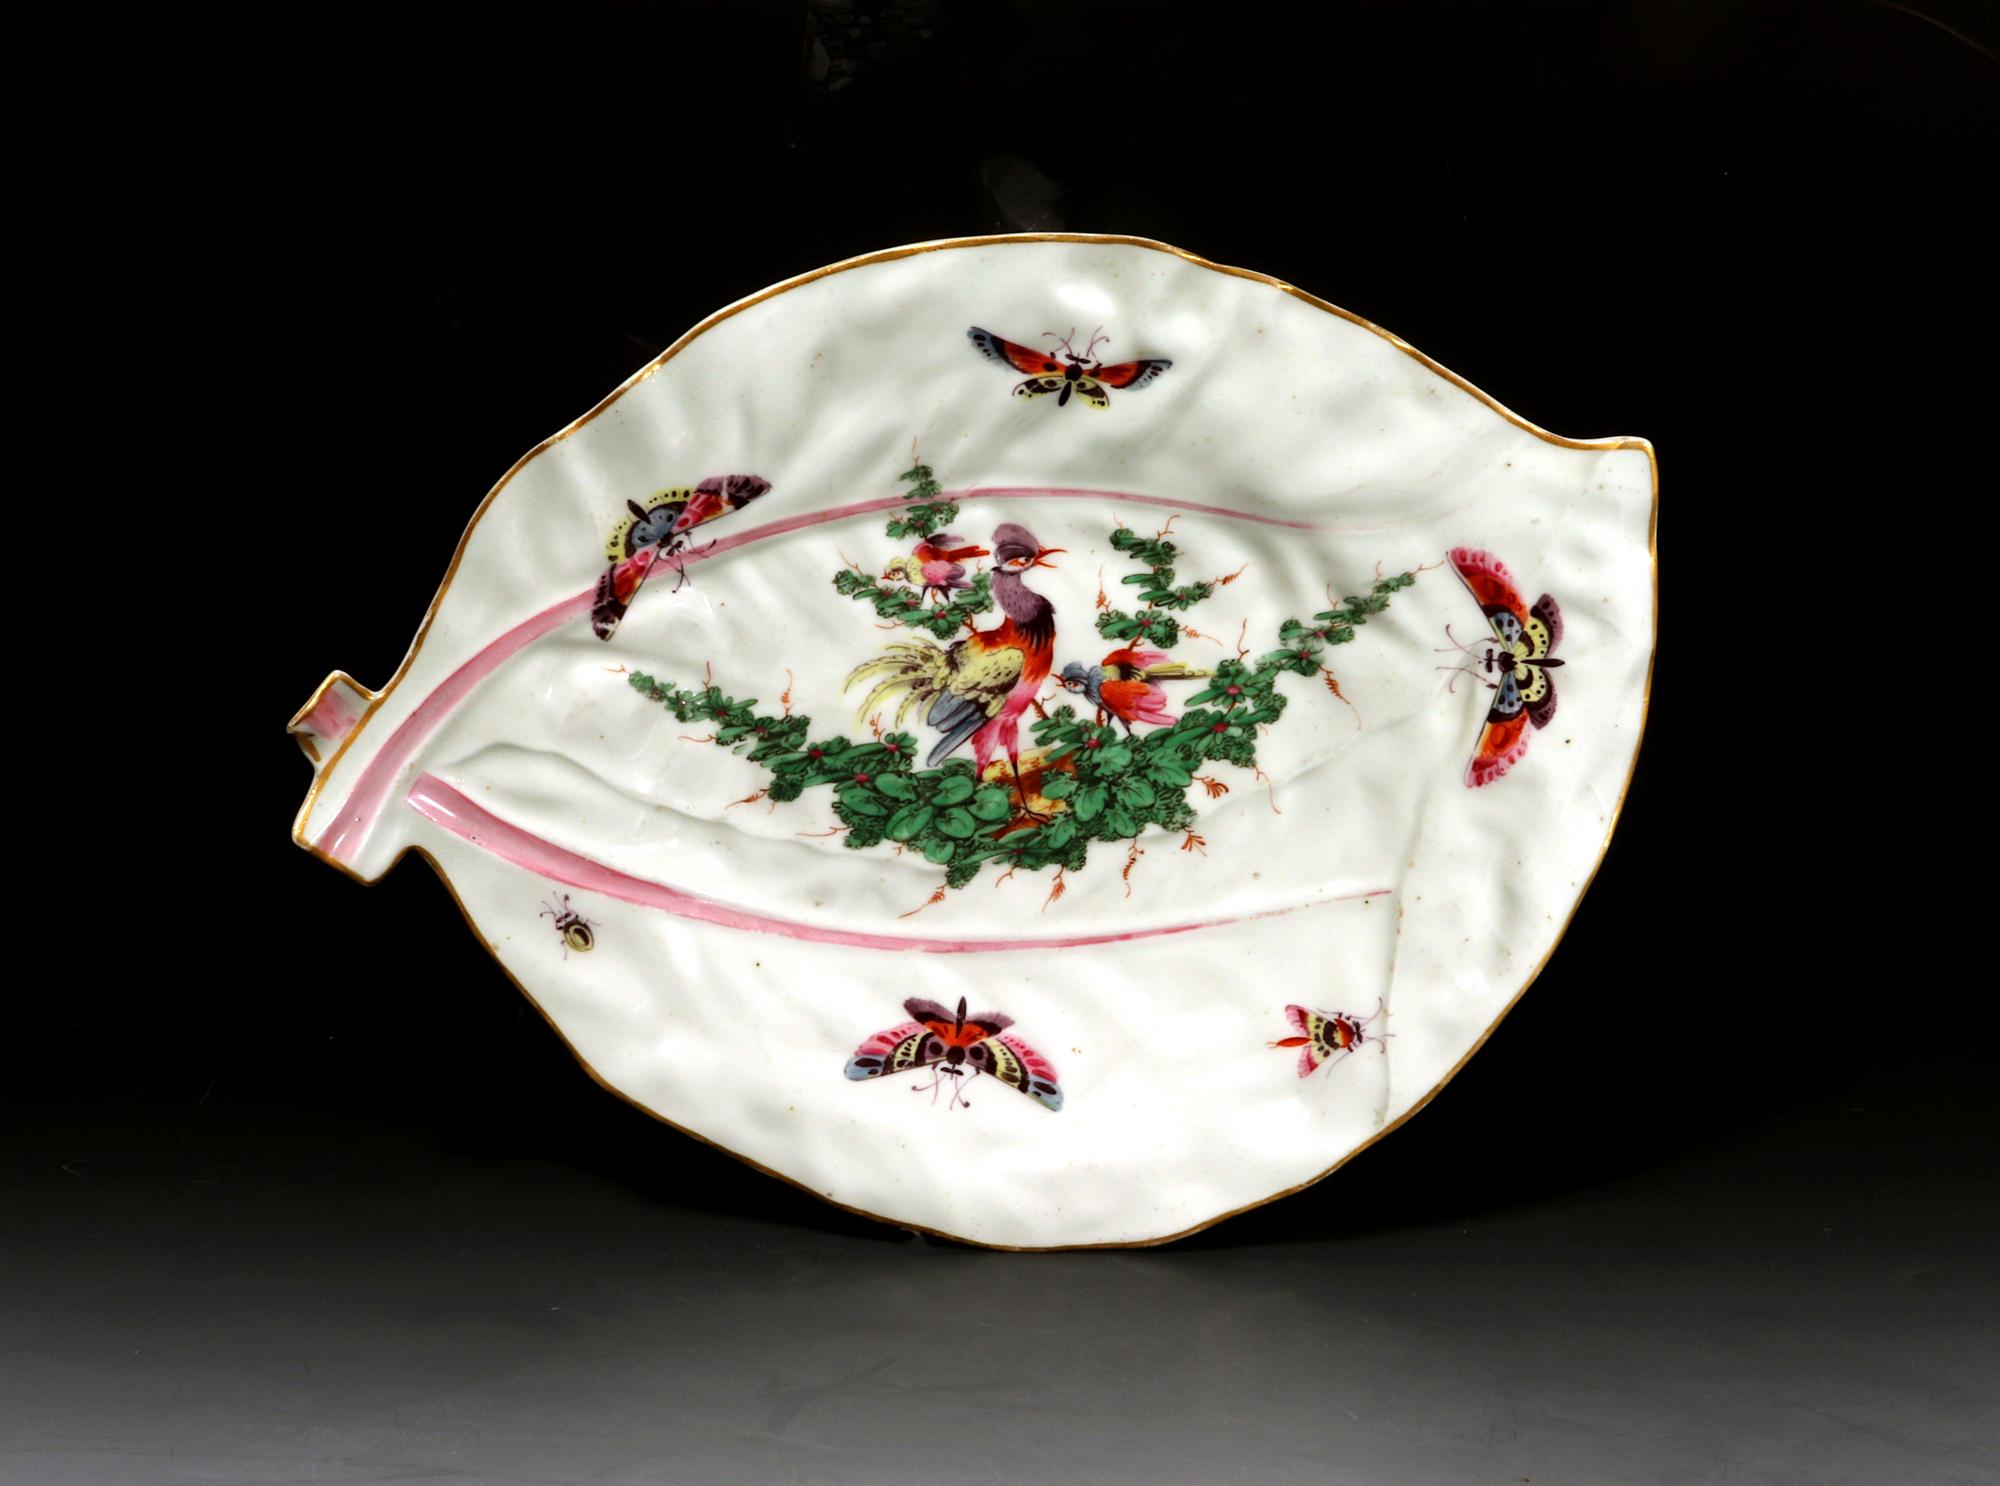 First Period Worcester porcelain fancy bird-decorated double-leaf dish,
Circa 1768

The Worcester porcelain molded dish is made in the form of two overlapping leaves. Across the painted center is a swag of green leaves with three exotic 